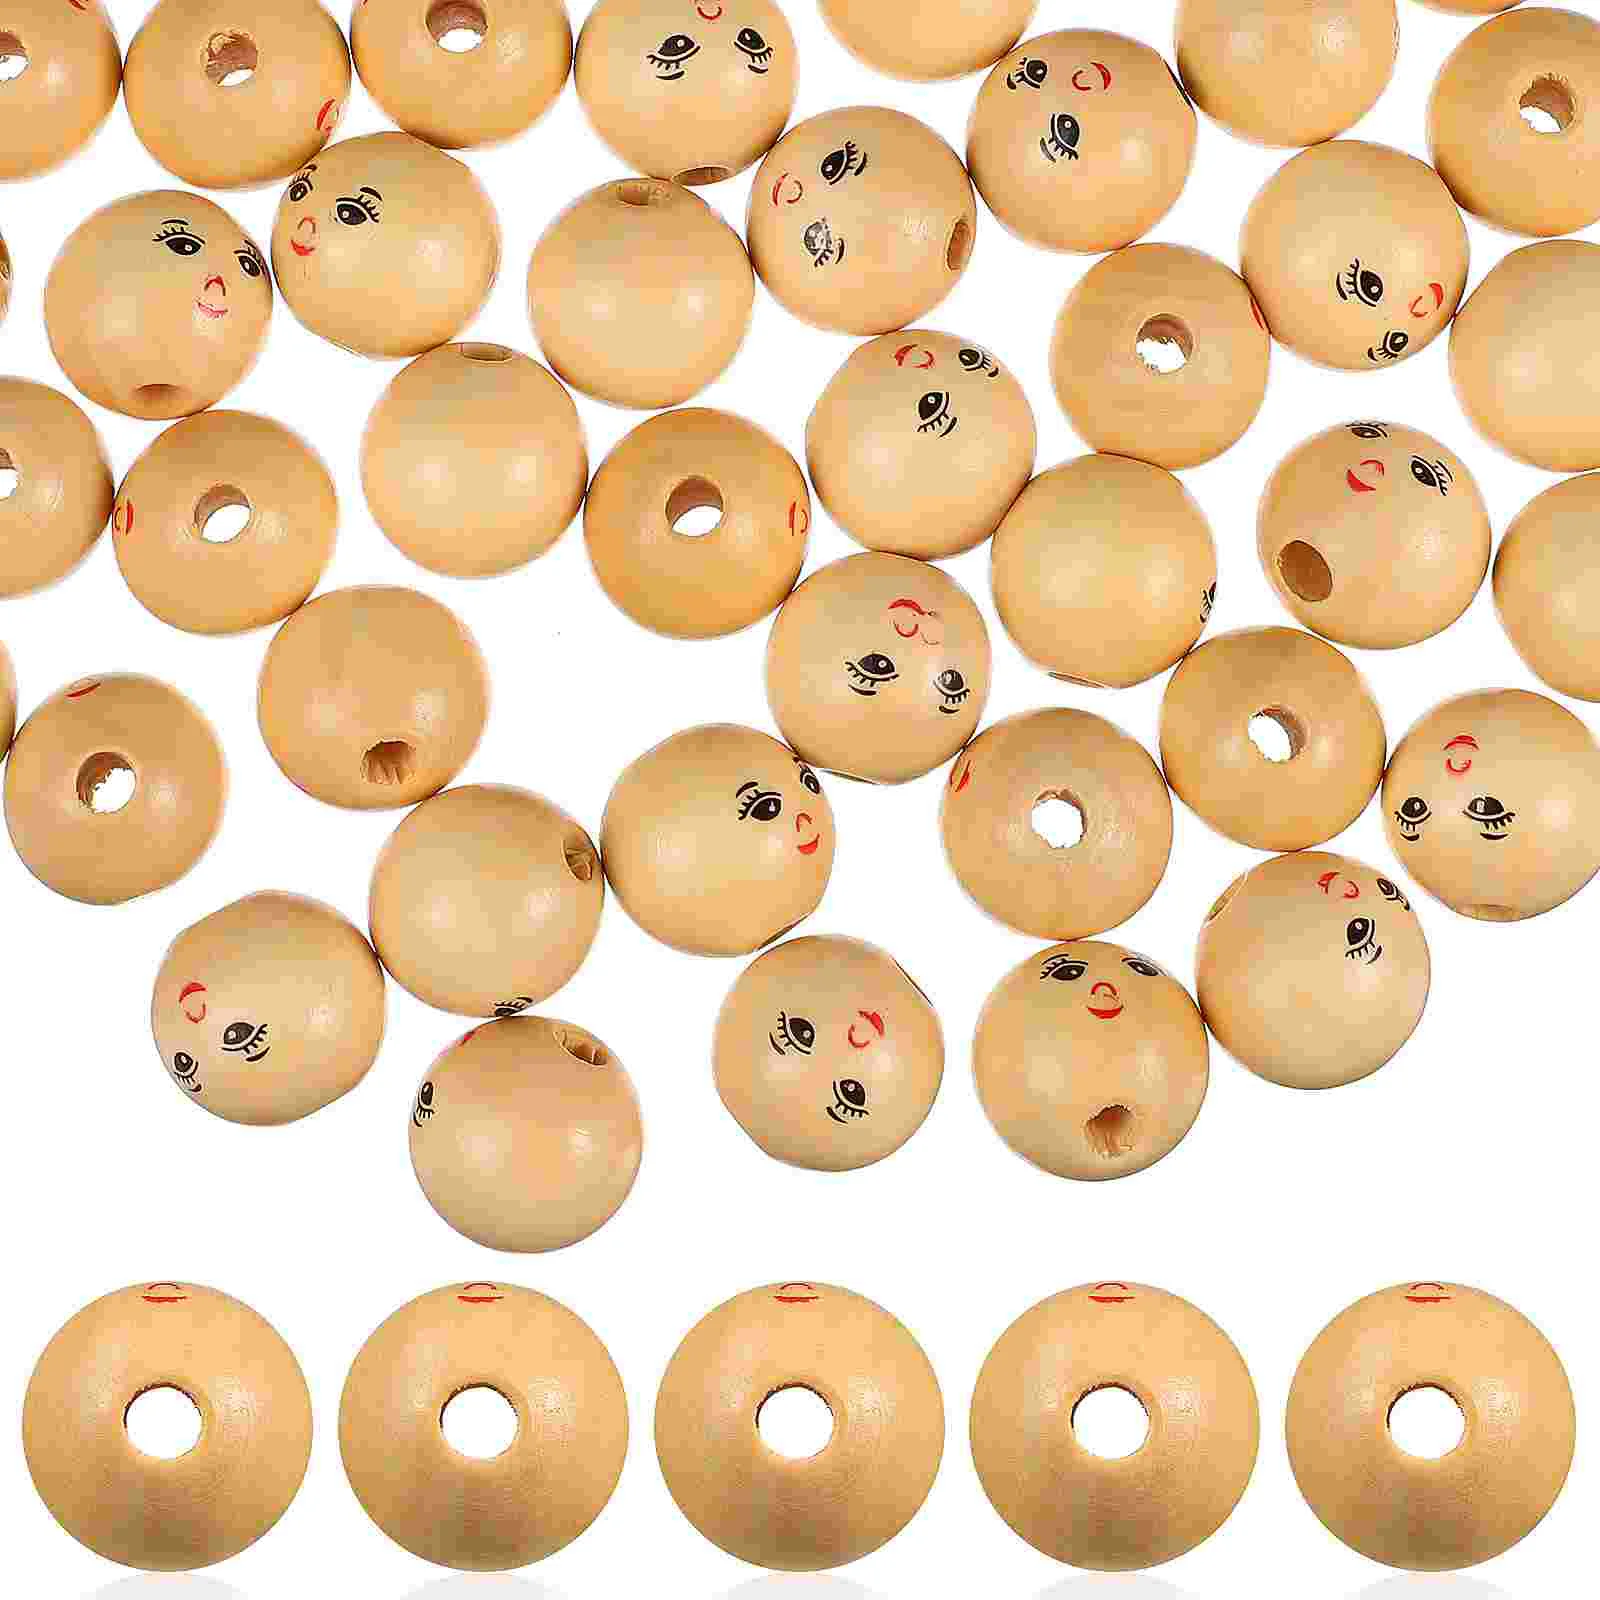 

50 Pcs Wood Bead Smile Face Beads Round Wooden Craft Large Hole With Holes Child Unfinished For Crafts